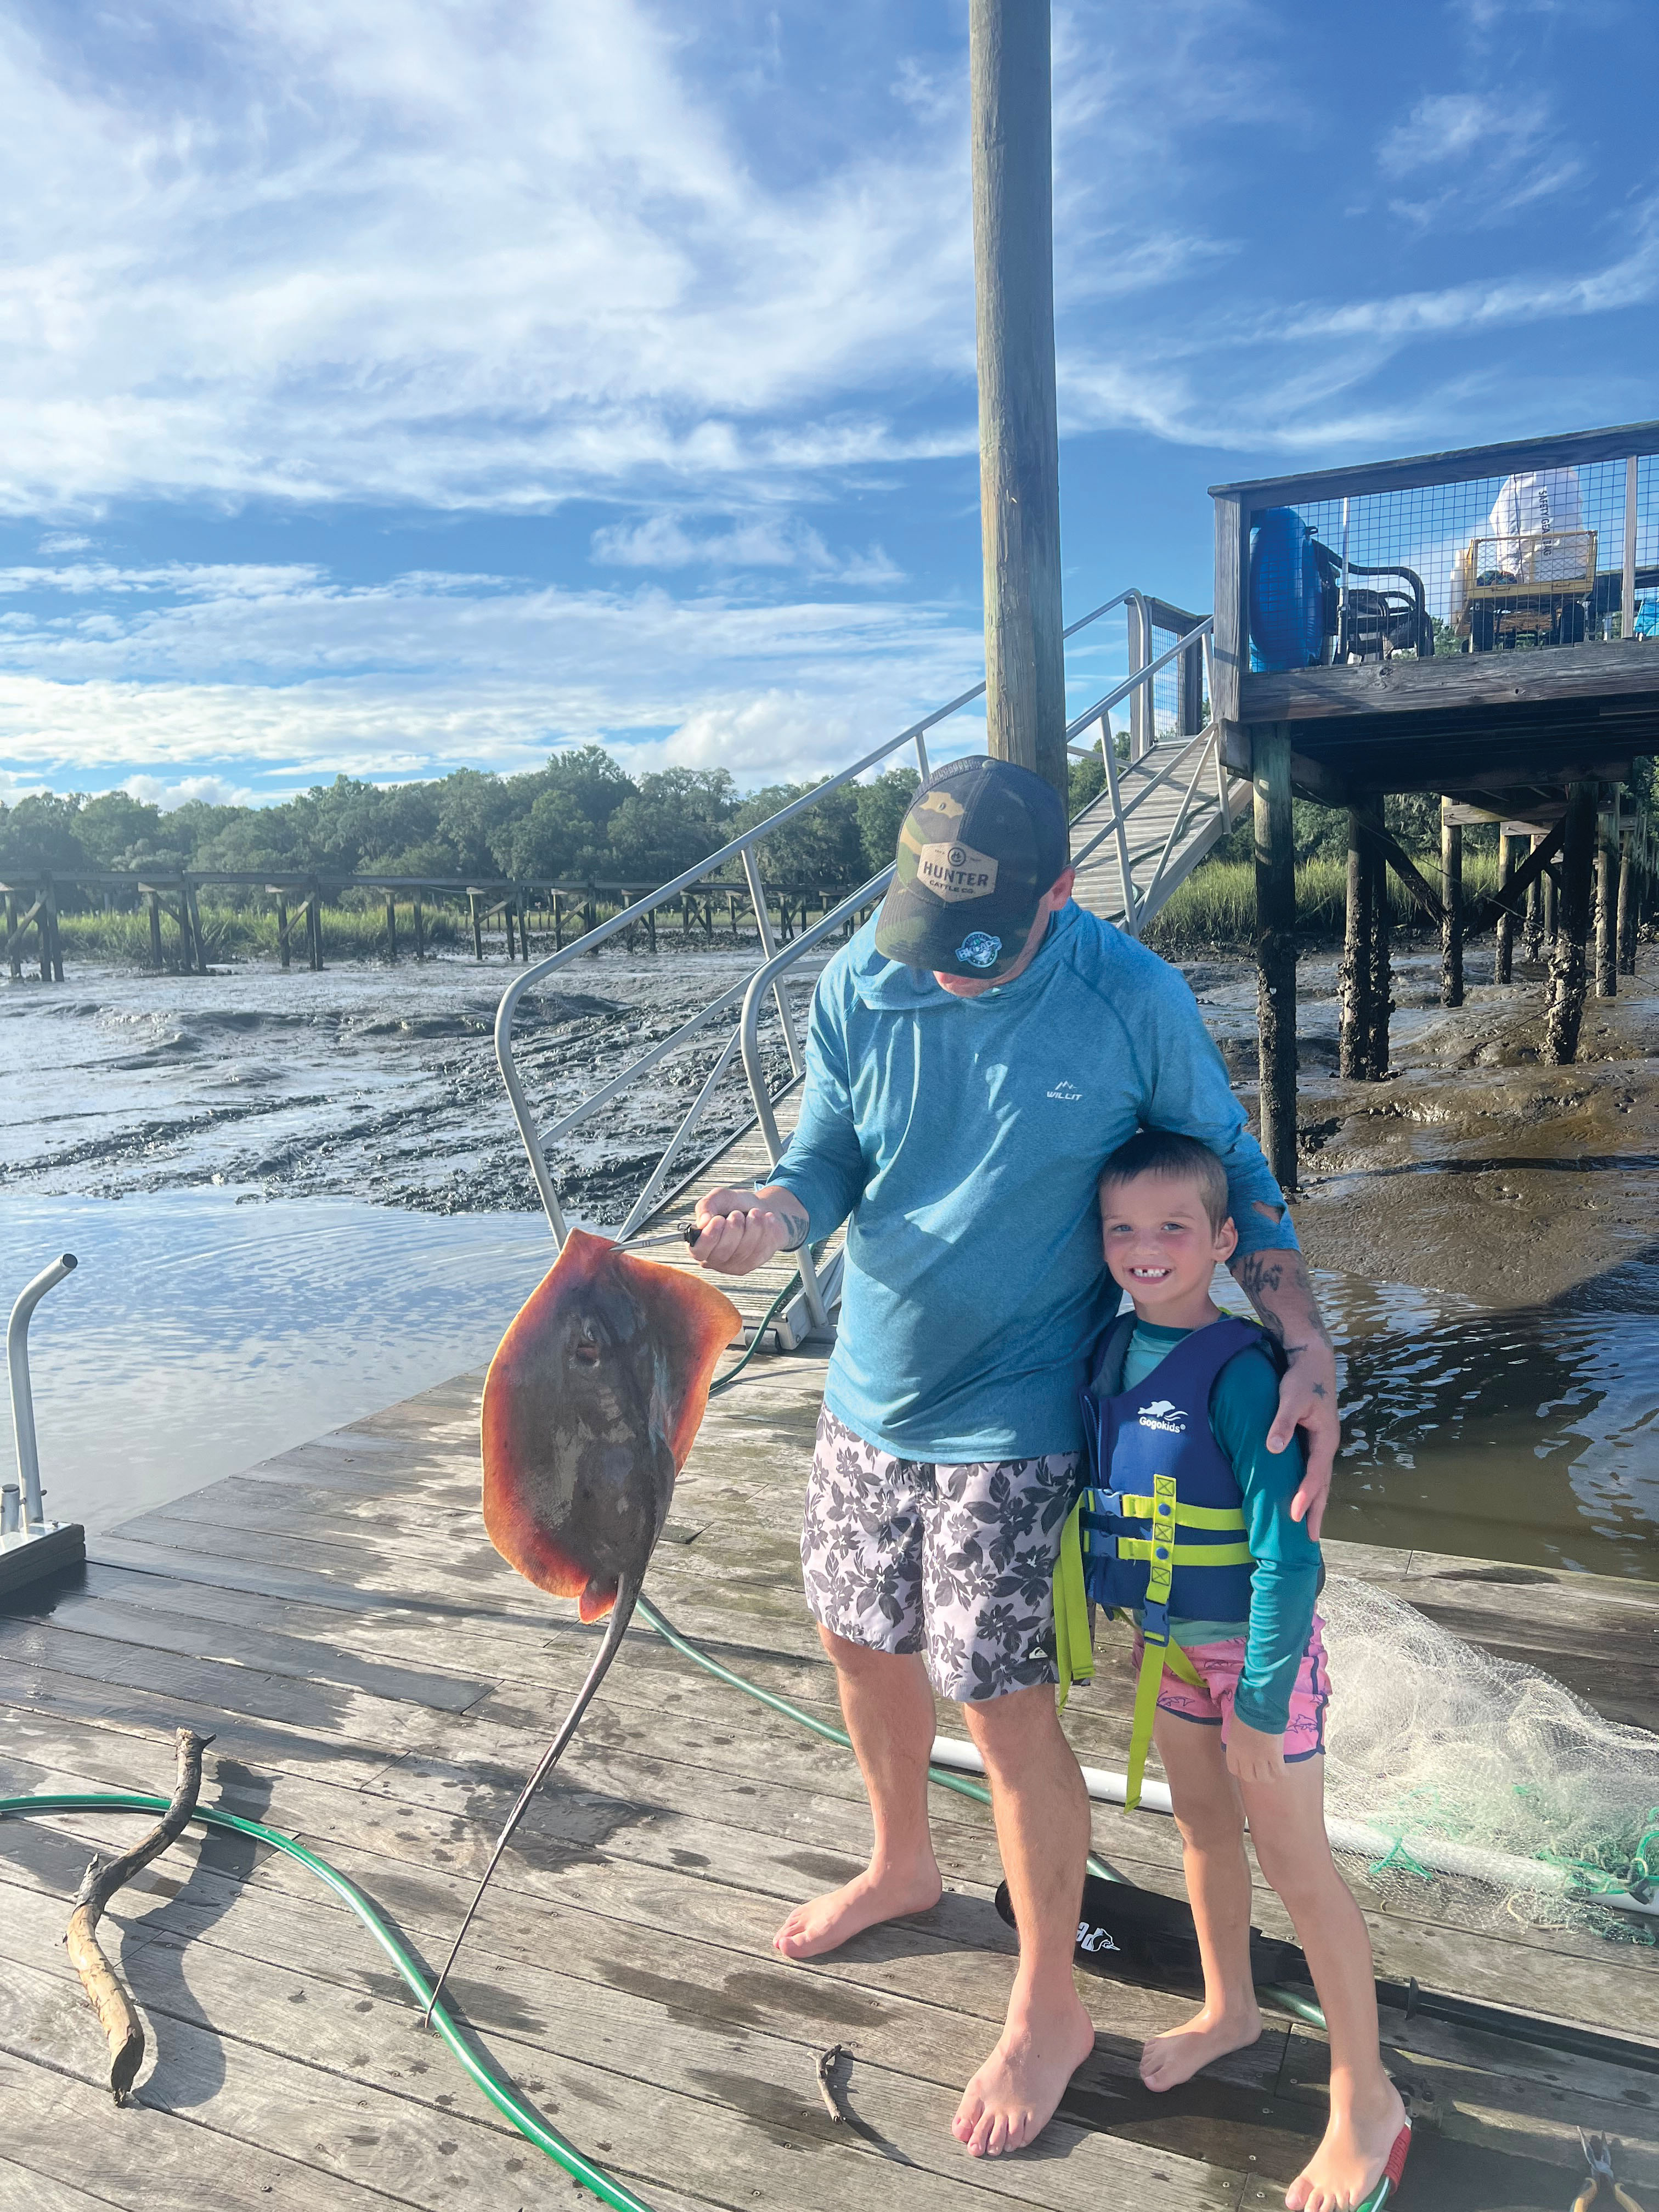 Setting the Hook: “My son’s favorite thing to do is fish. We never really catch anything, but it’s more about spending time together and being outside.”